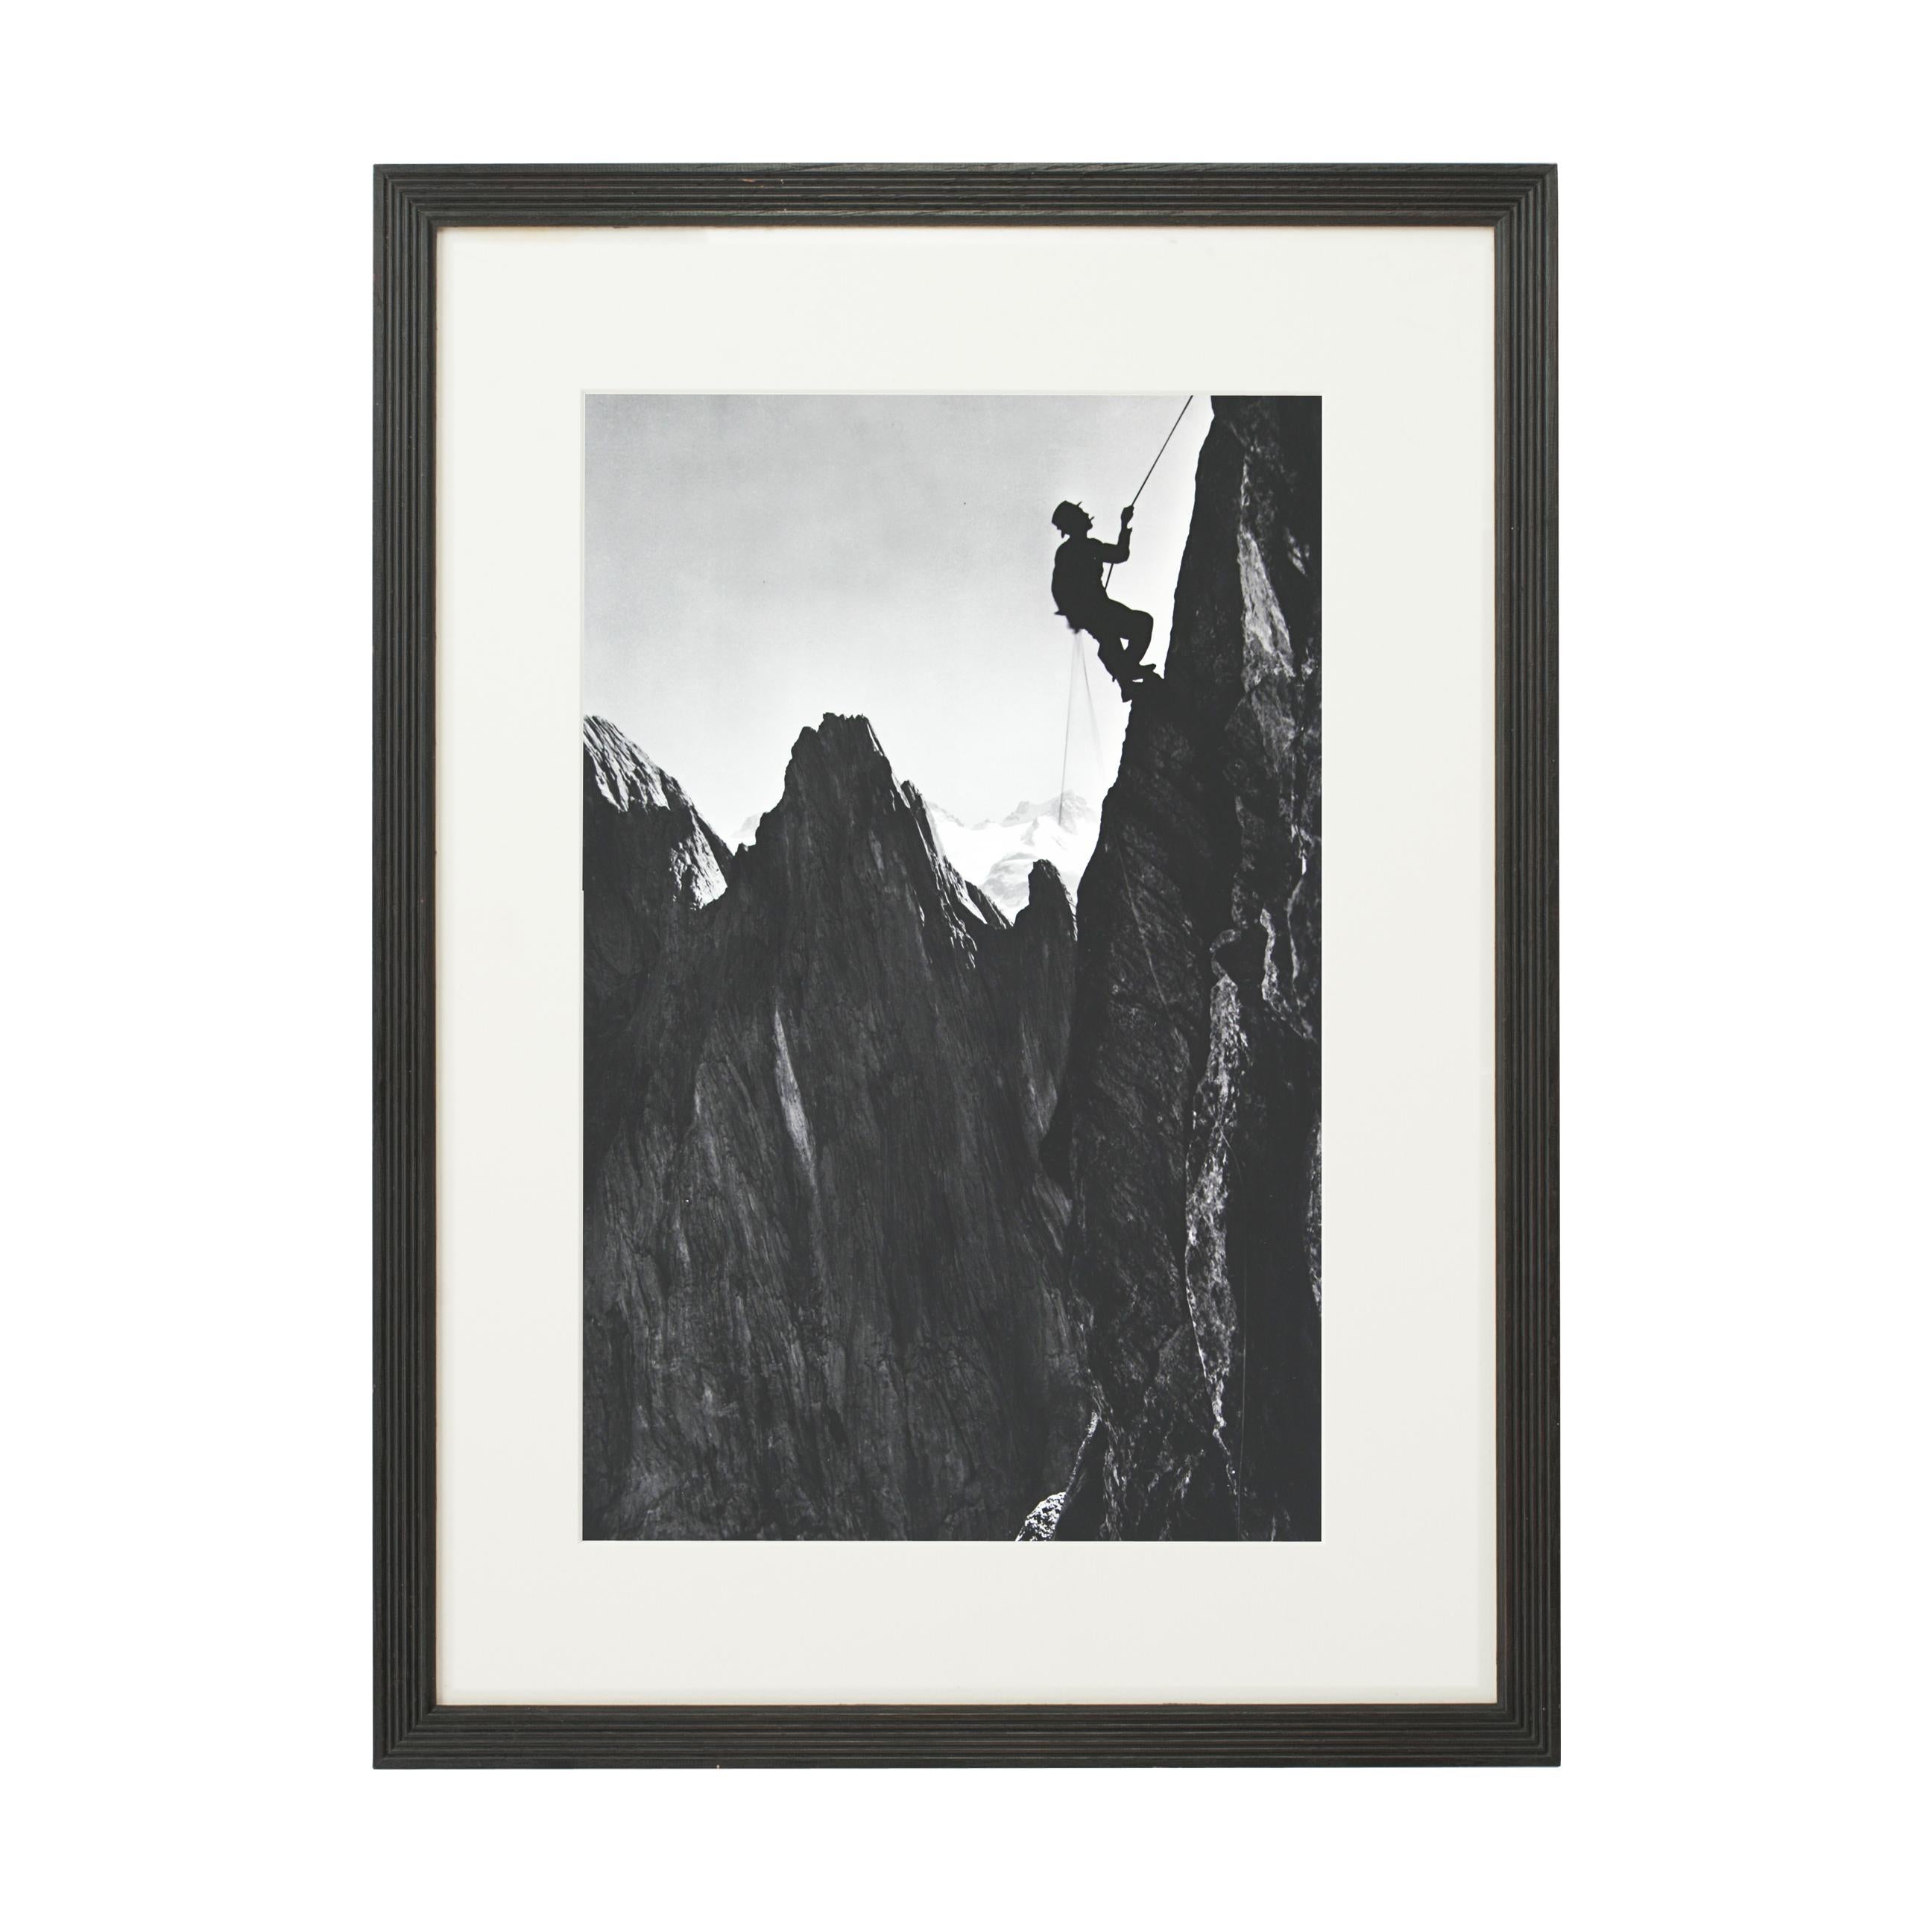 Paper Alpine Mountaineering Photograph, 'CLIMBER' Taken from 1930s Original For Sale